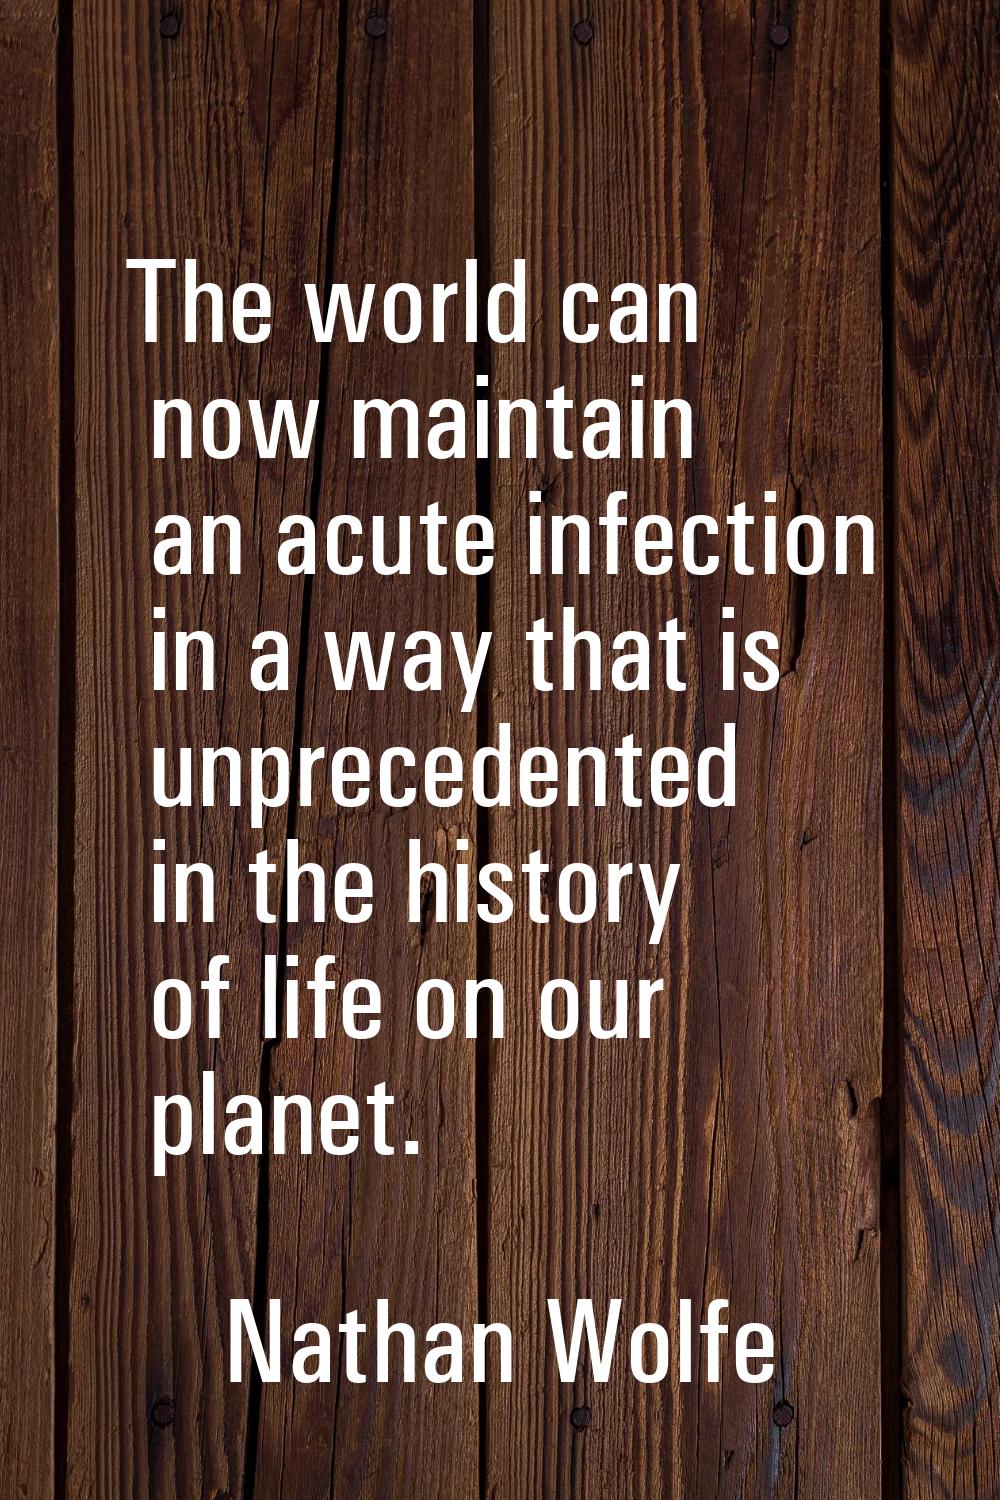 The world can now maintain an acute infection in a way that is unprecedented in the history of life